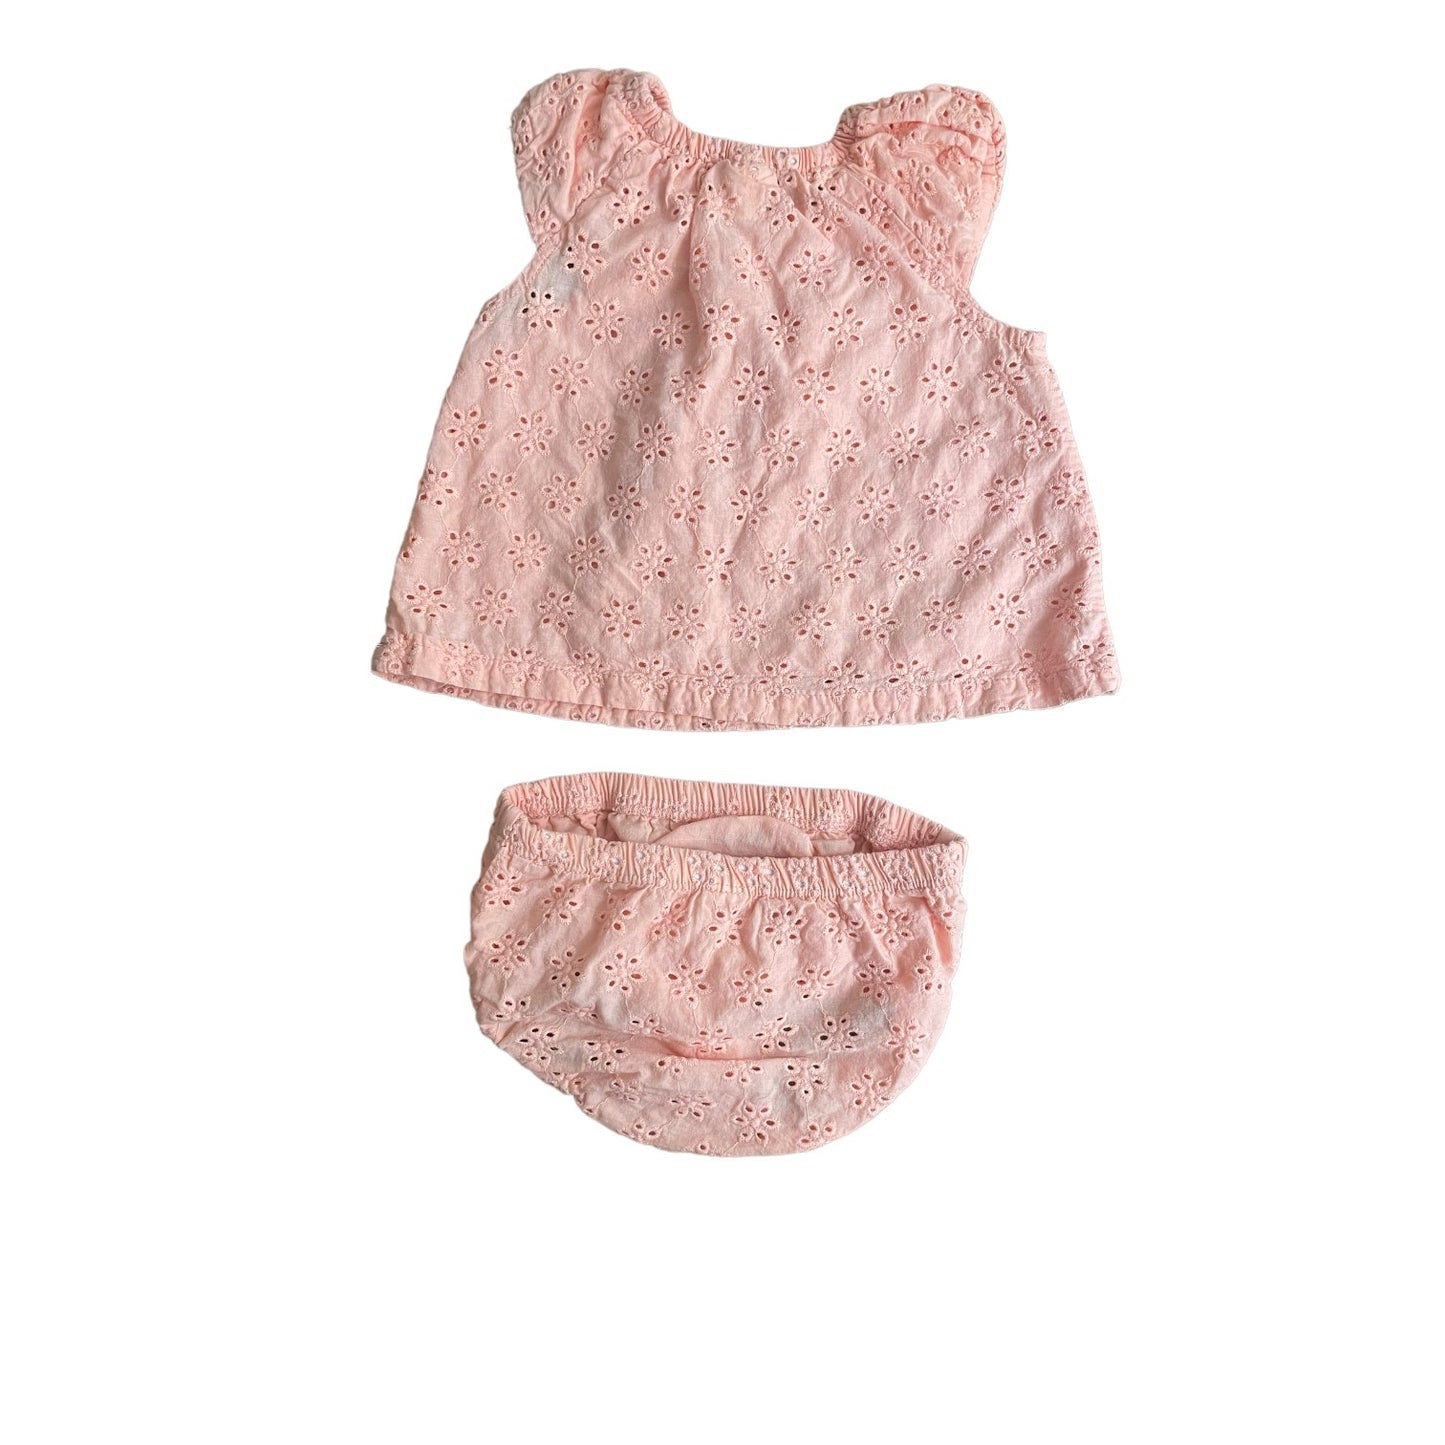 Infant Girls Dress with Eyelet Lace Size 3-6 months